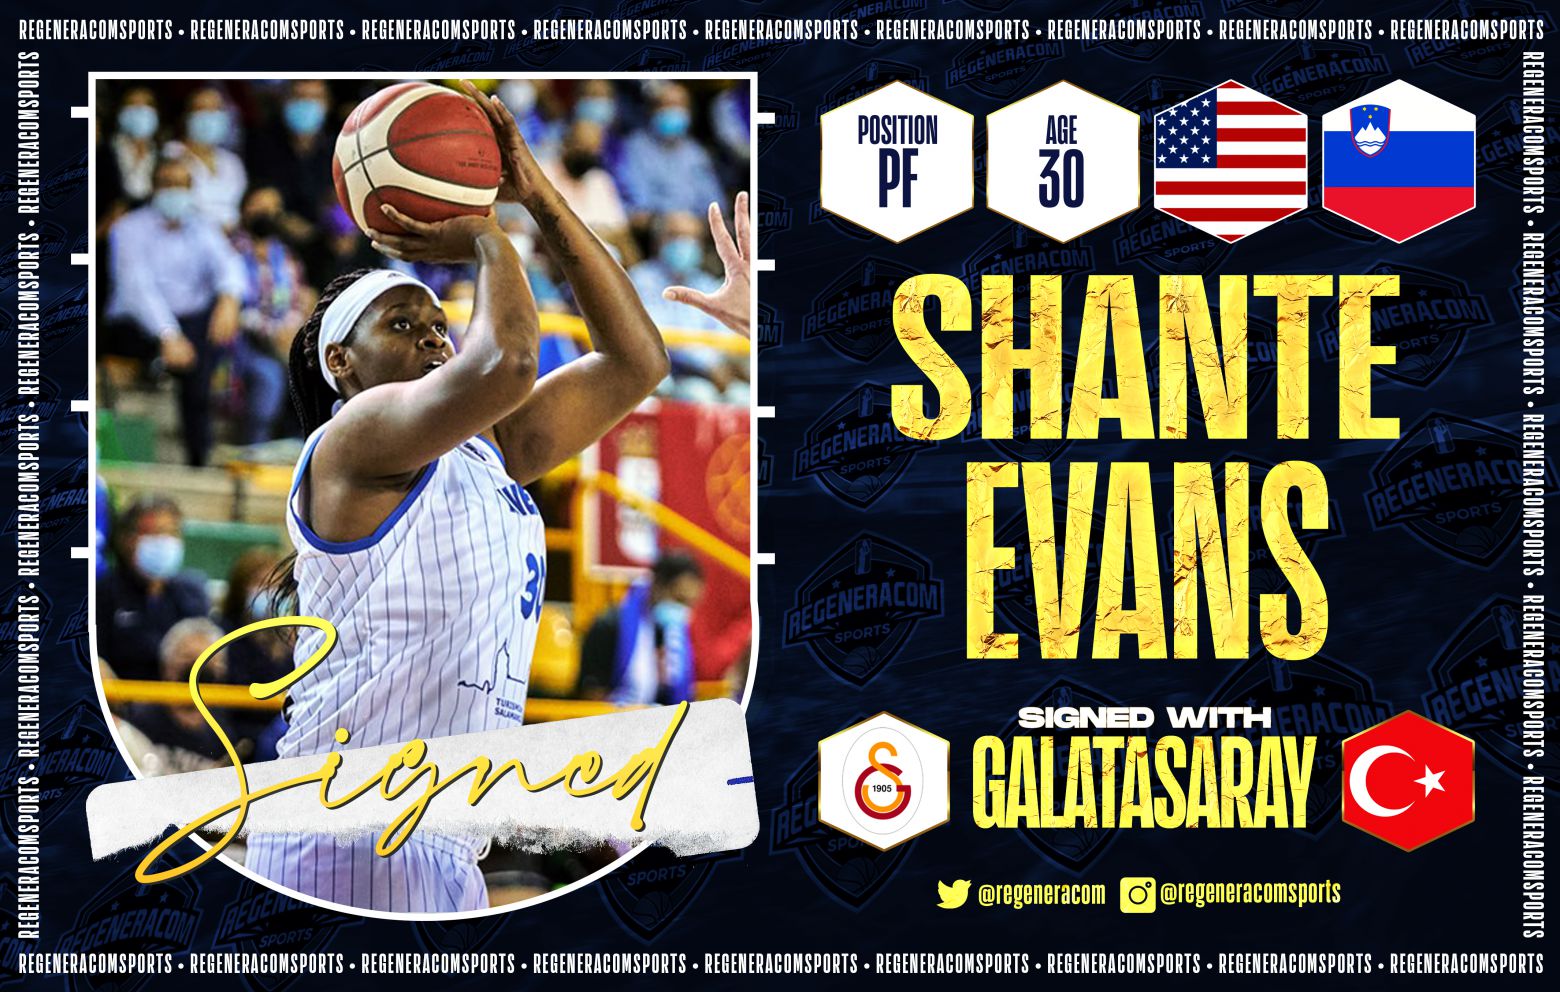 SHANTE EVANS has signed in Turkey with Galatasaray